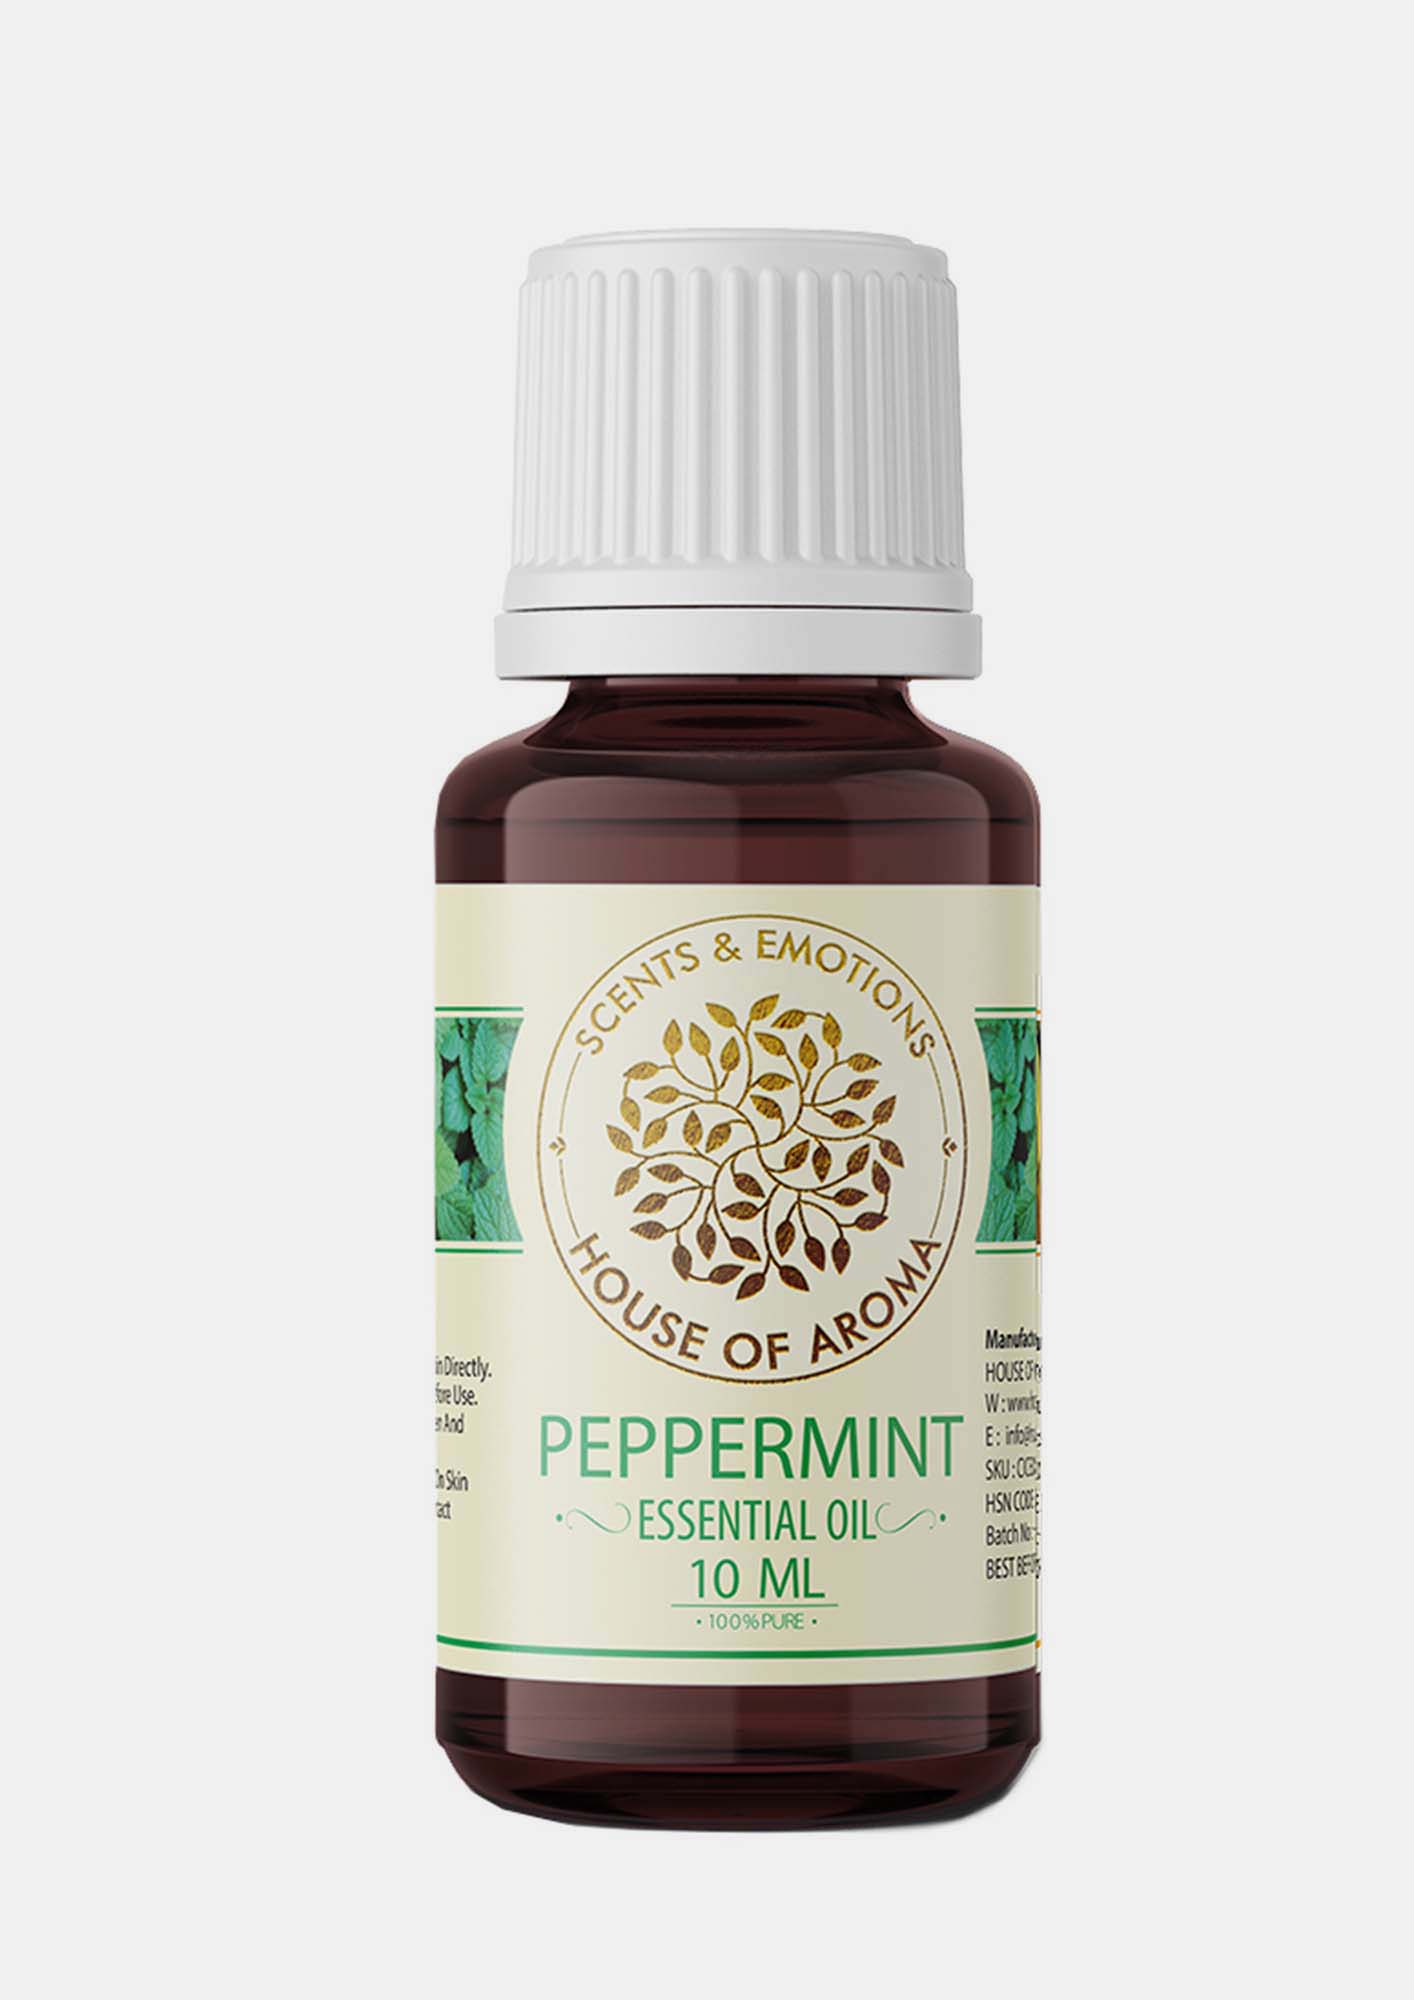 Buy Pure & Best Peppermint Essential Oil Online in India